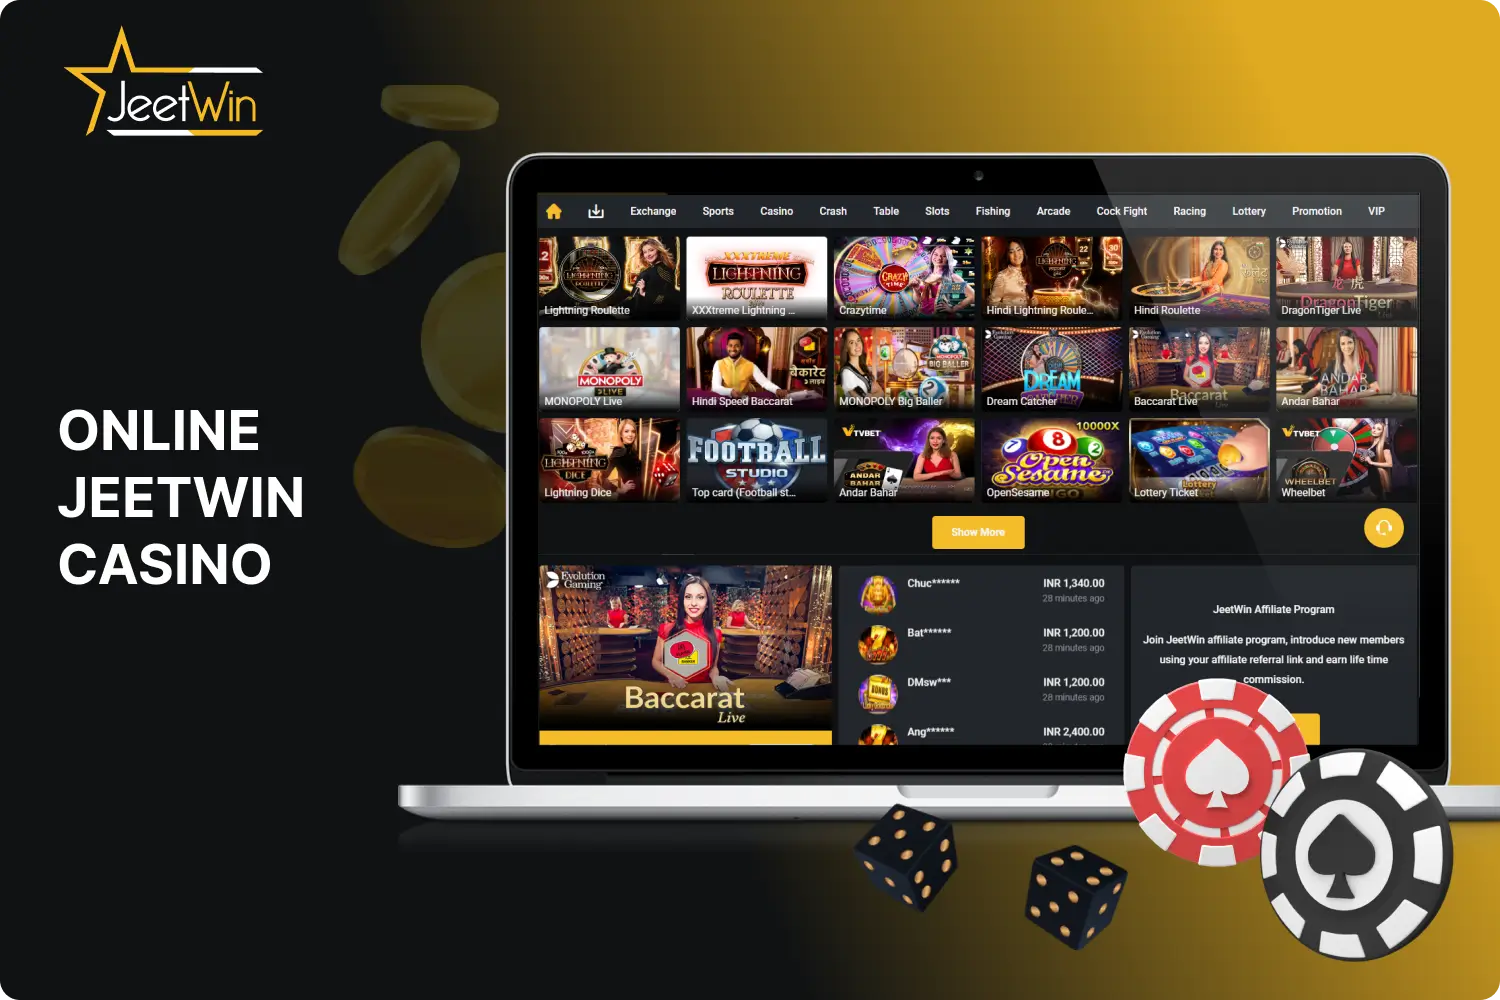 Jeetwin online casino in India offers hundreds of gambling activities to its users